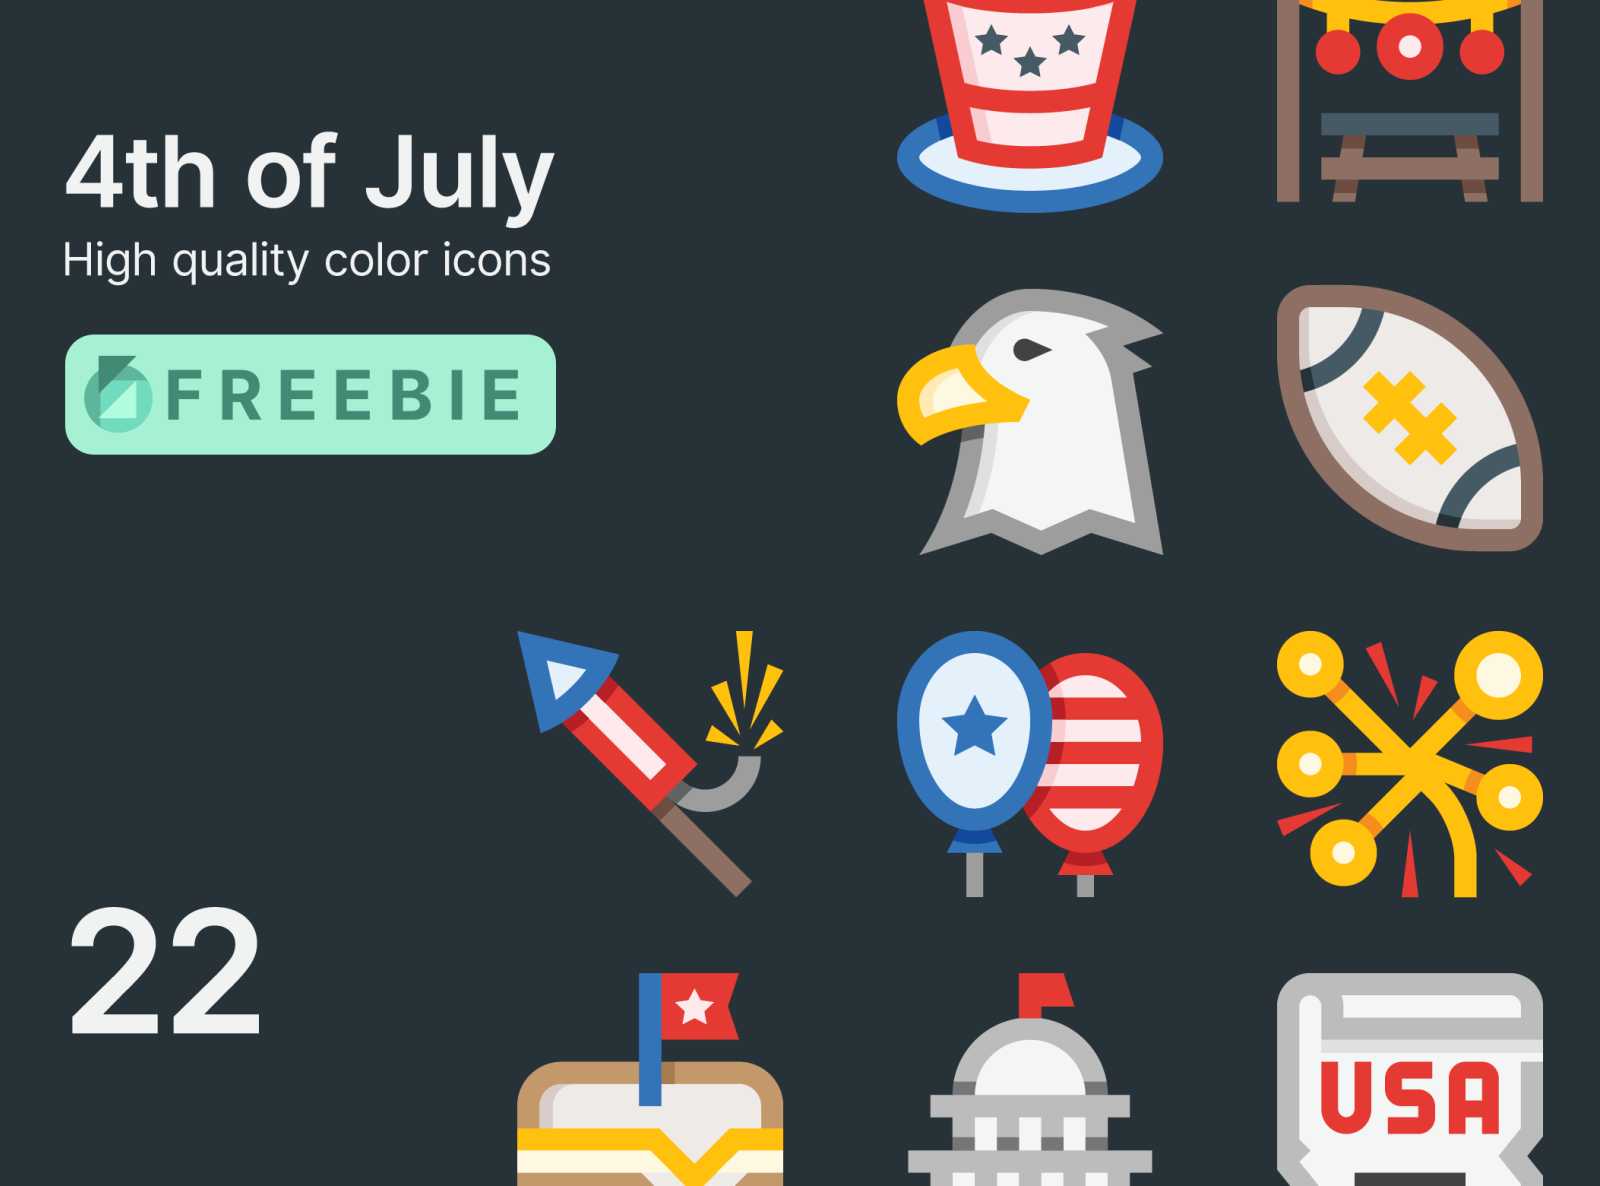 FREE. 4th of July Icons 4th of july basicons bbq celebration event federal free freebie holiday icons illustration independence day united states usa vector